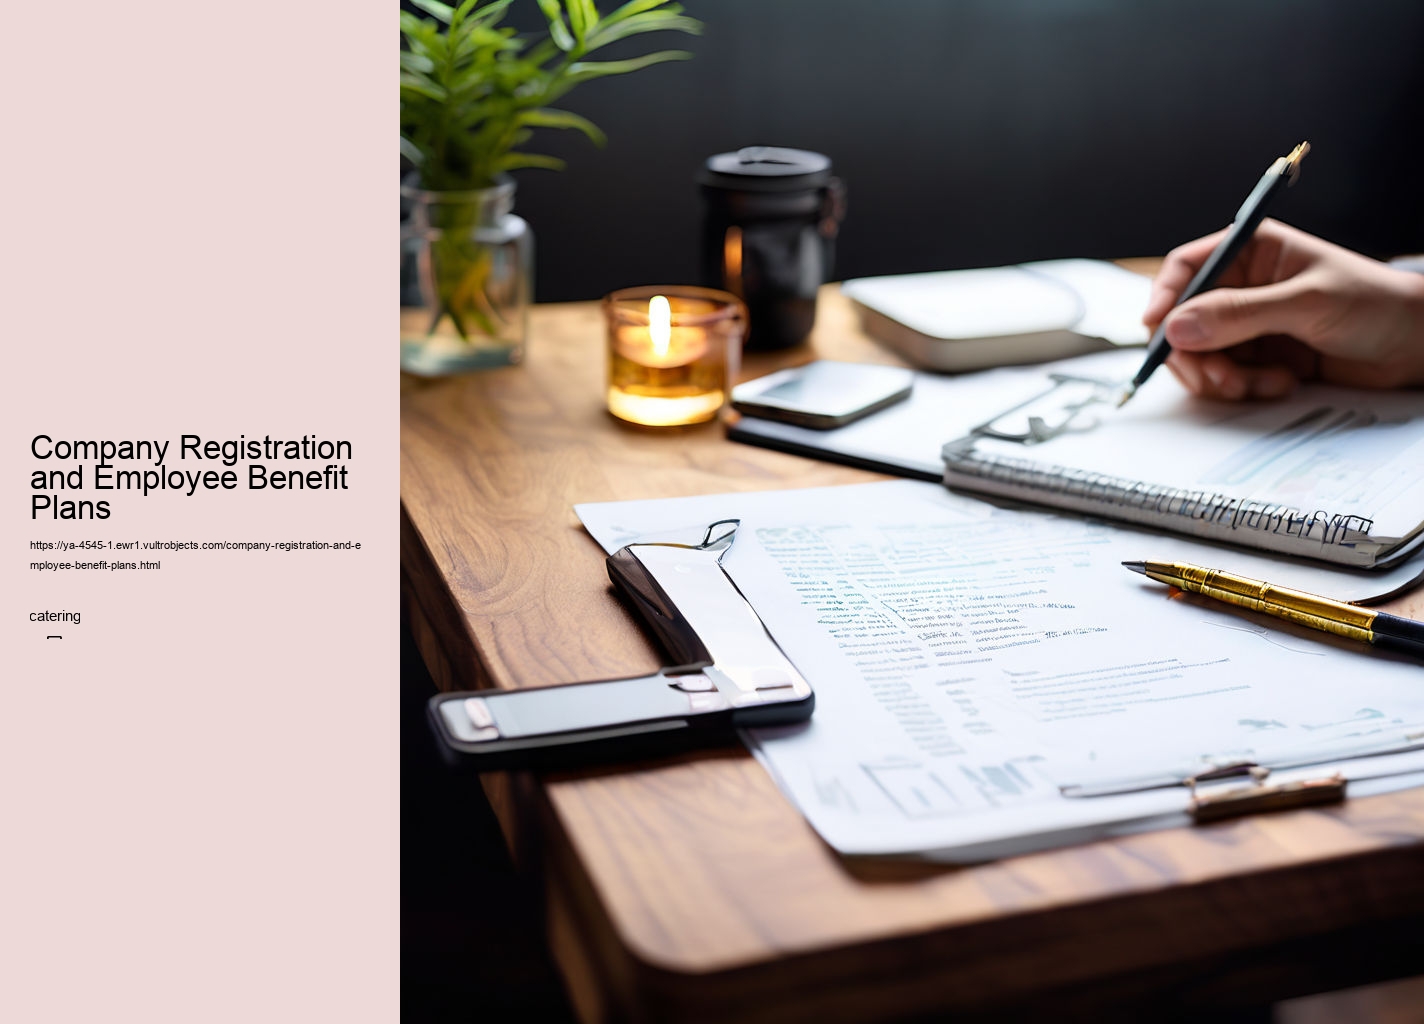 Company Registration and Employee Benefit Plans